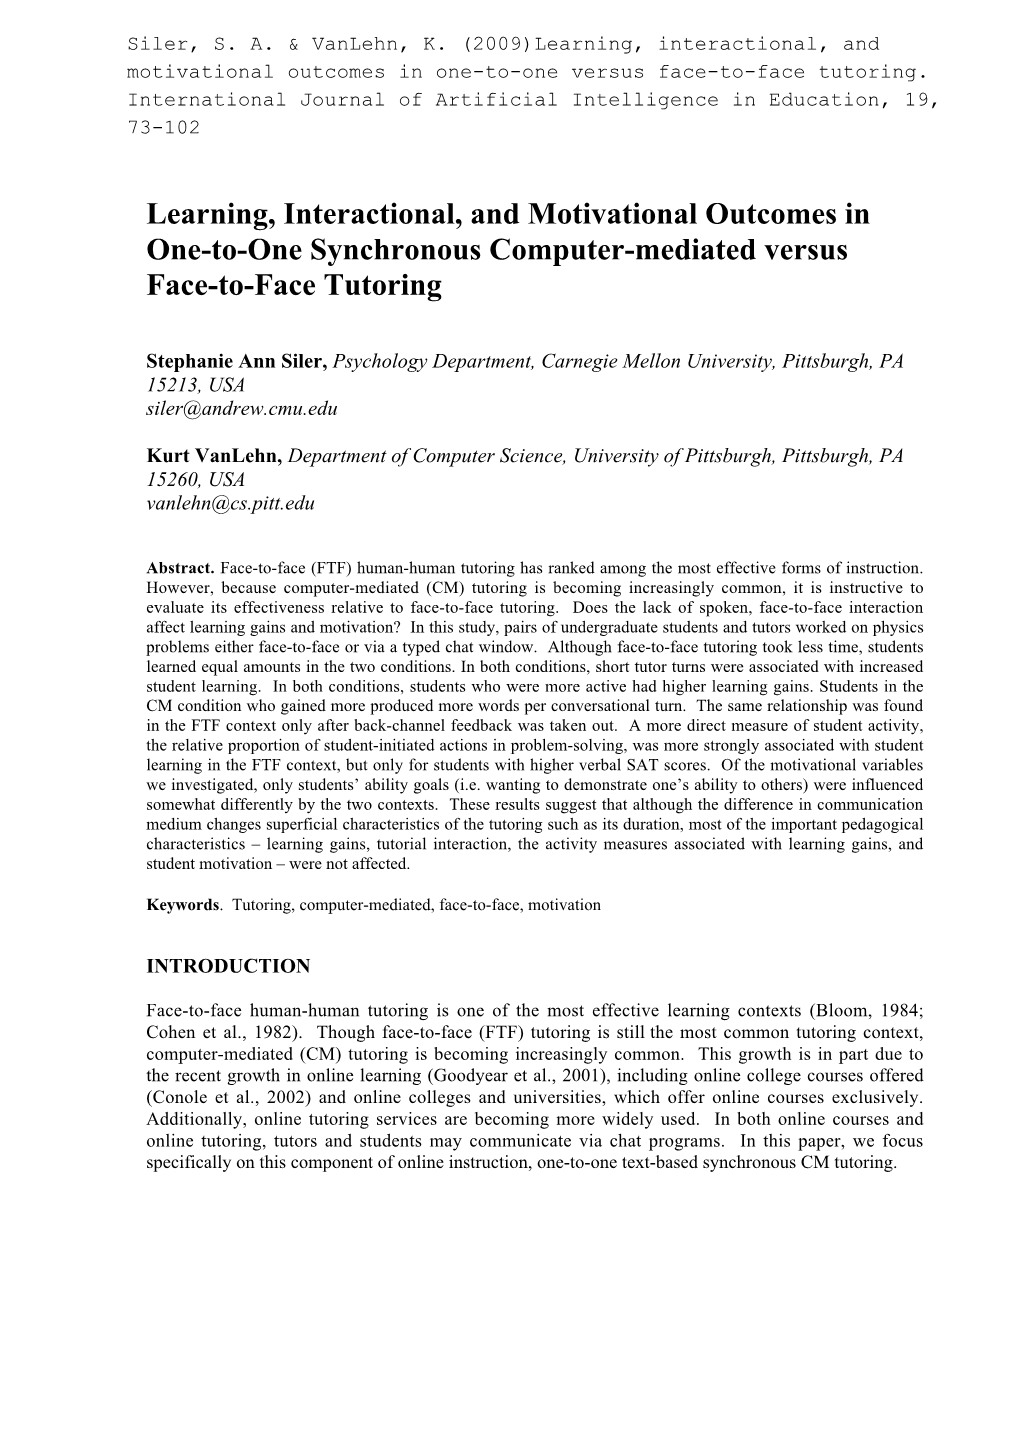 Learning, Interactional, and Motivational Outcomes in One-To-One Synchronous Computer-Mediated Versus Face-To-Face Tutoring